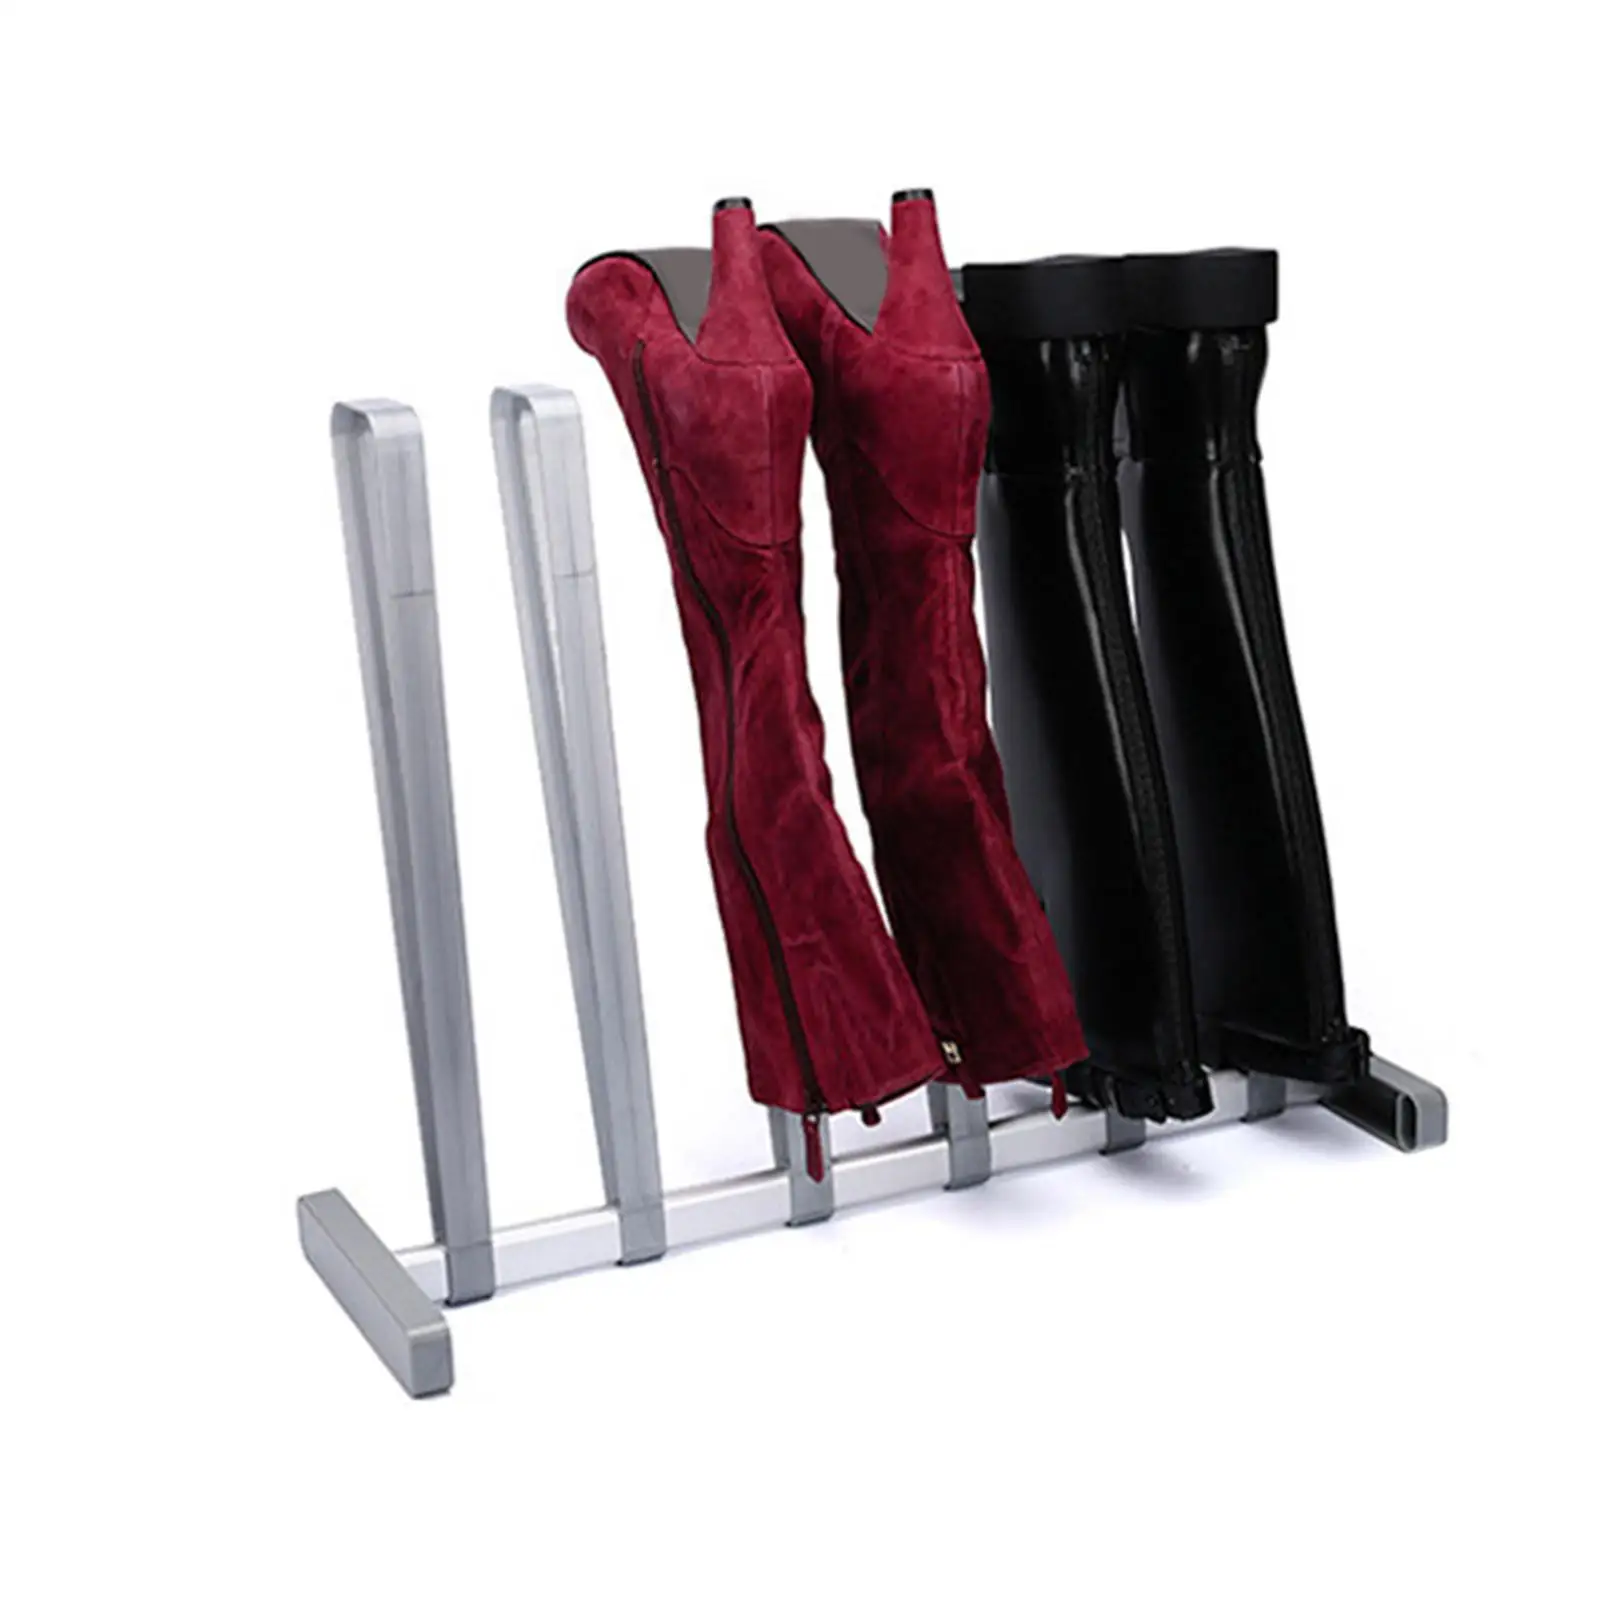 3 Pair Boots Rack Accessories Adjustable Heavy Duty Frame Free Standing Shoe Rack Boot Organizer for Bedroom Closet Entryway